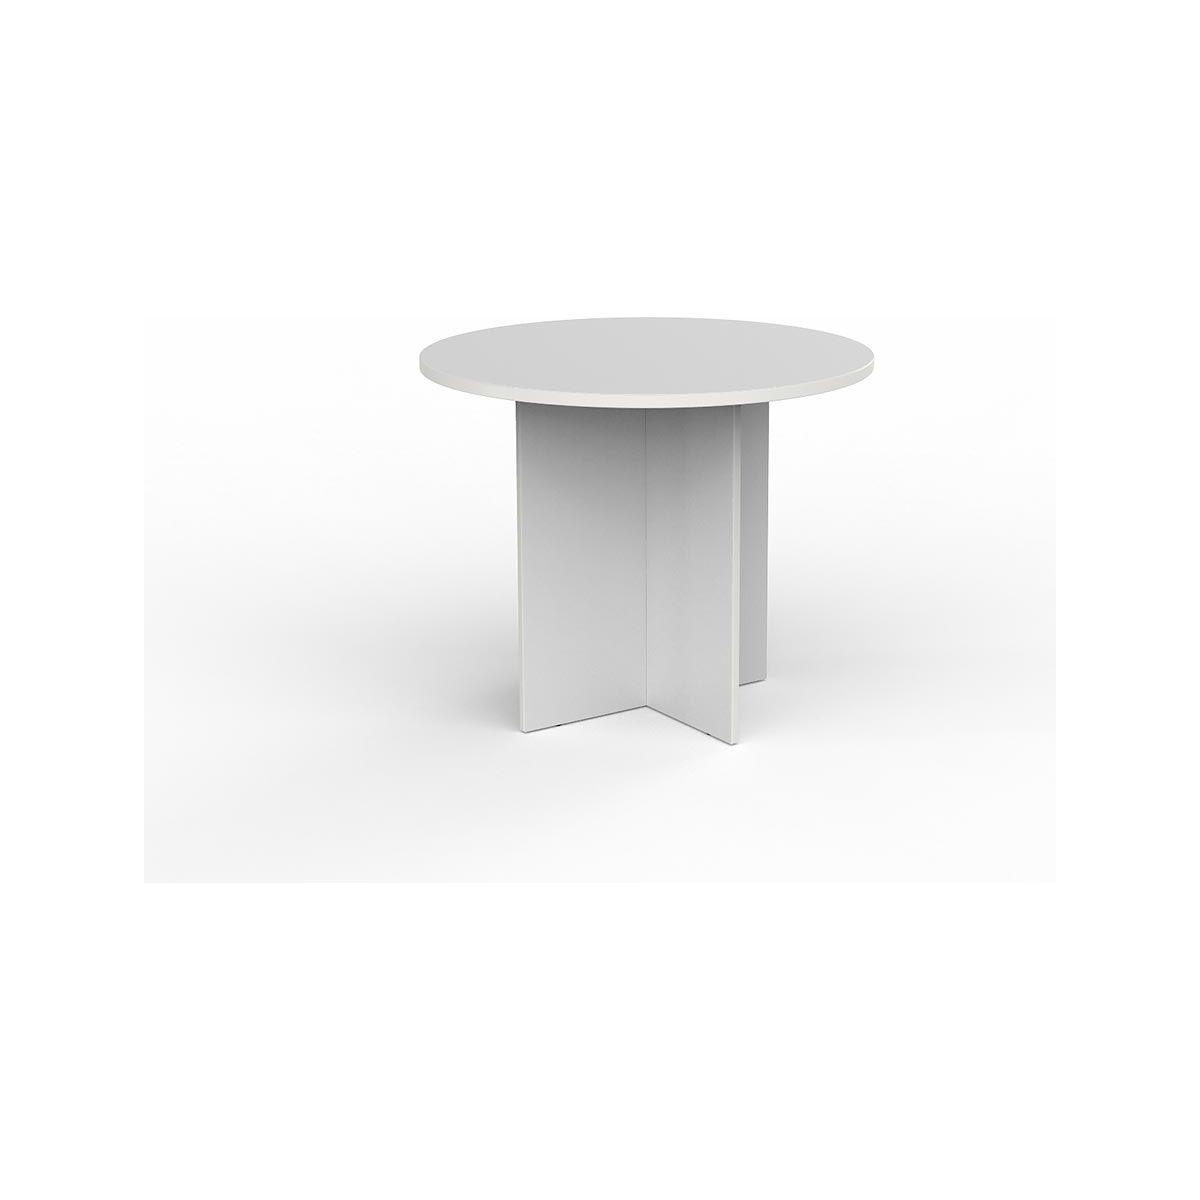 EkoSystem Round Meeting Table - Office Furniture Company 